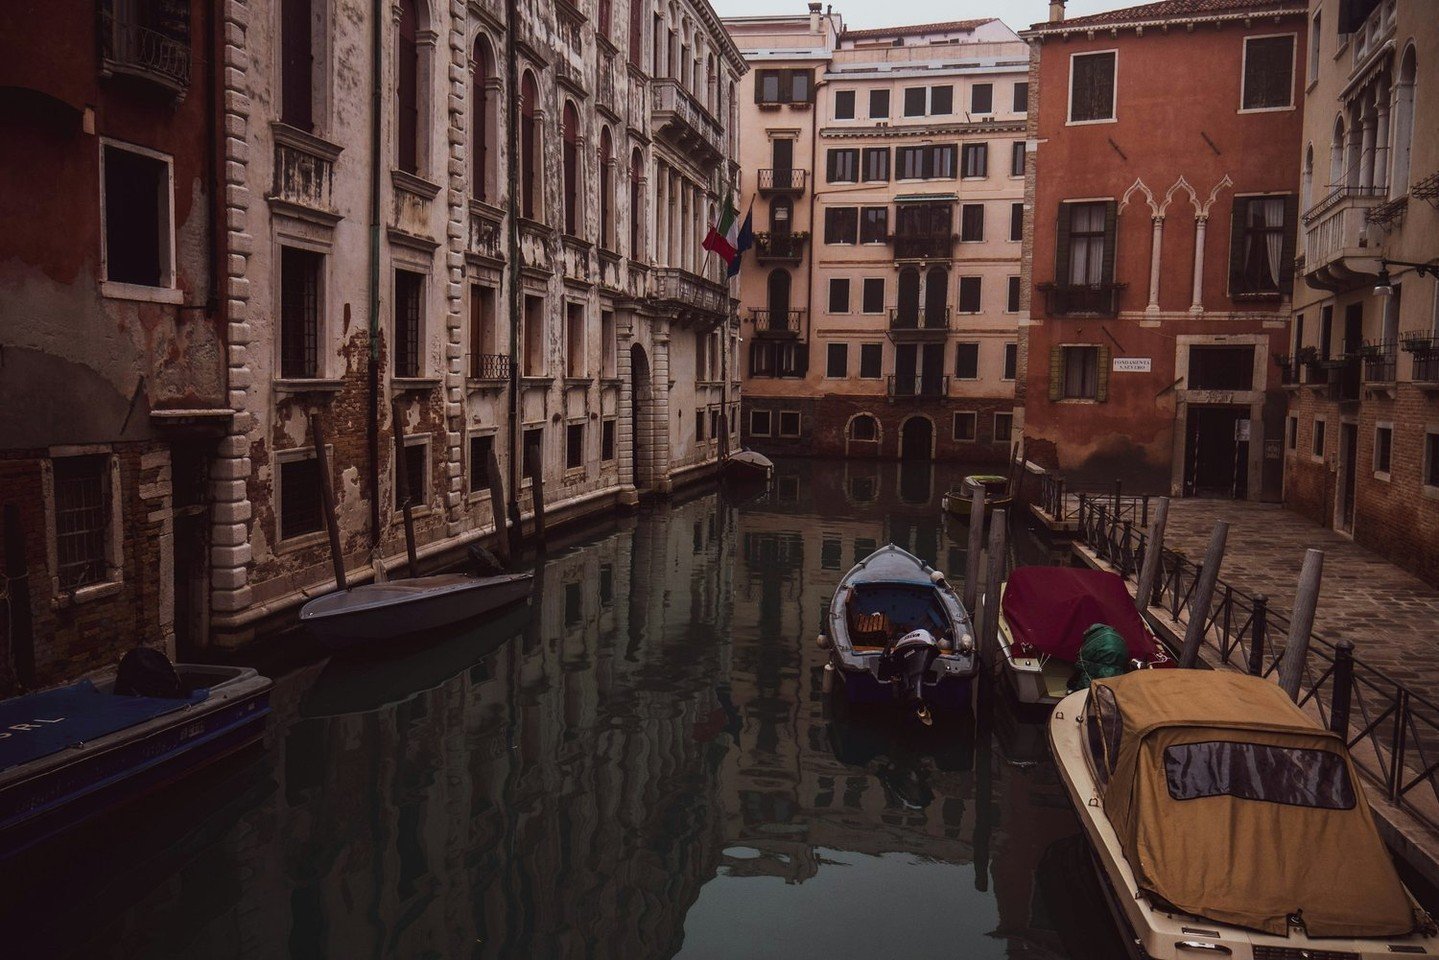 Autumn in Venice is the best time to discover the Serenissima #venice #tour #photography #luxury 
https://www.msecchi.com/journal/autumn-in-winter-the-perfect-time-for-photography-in-venice